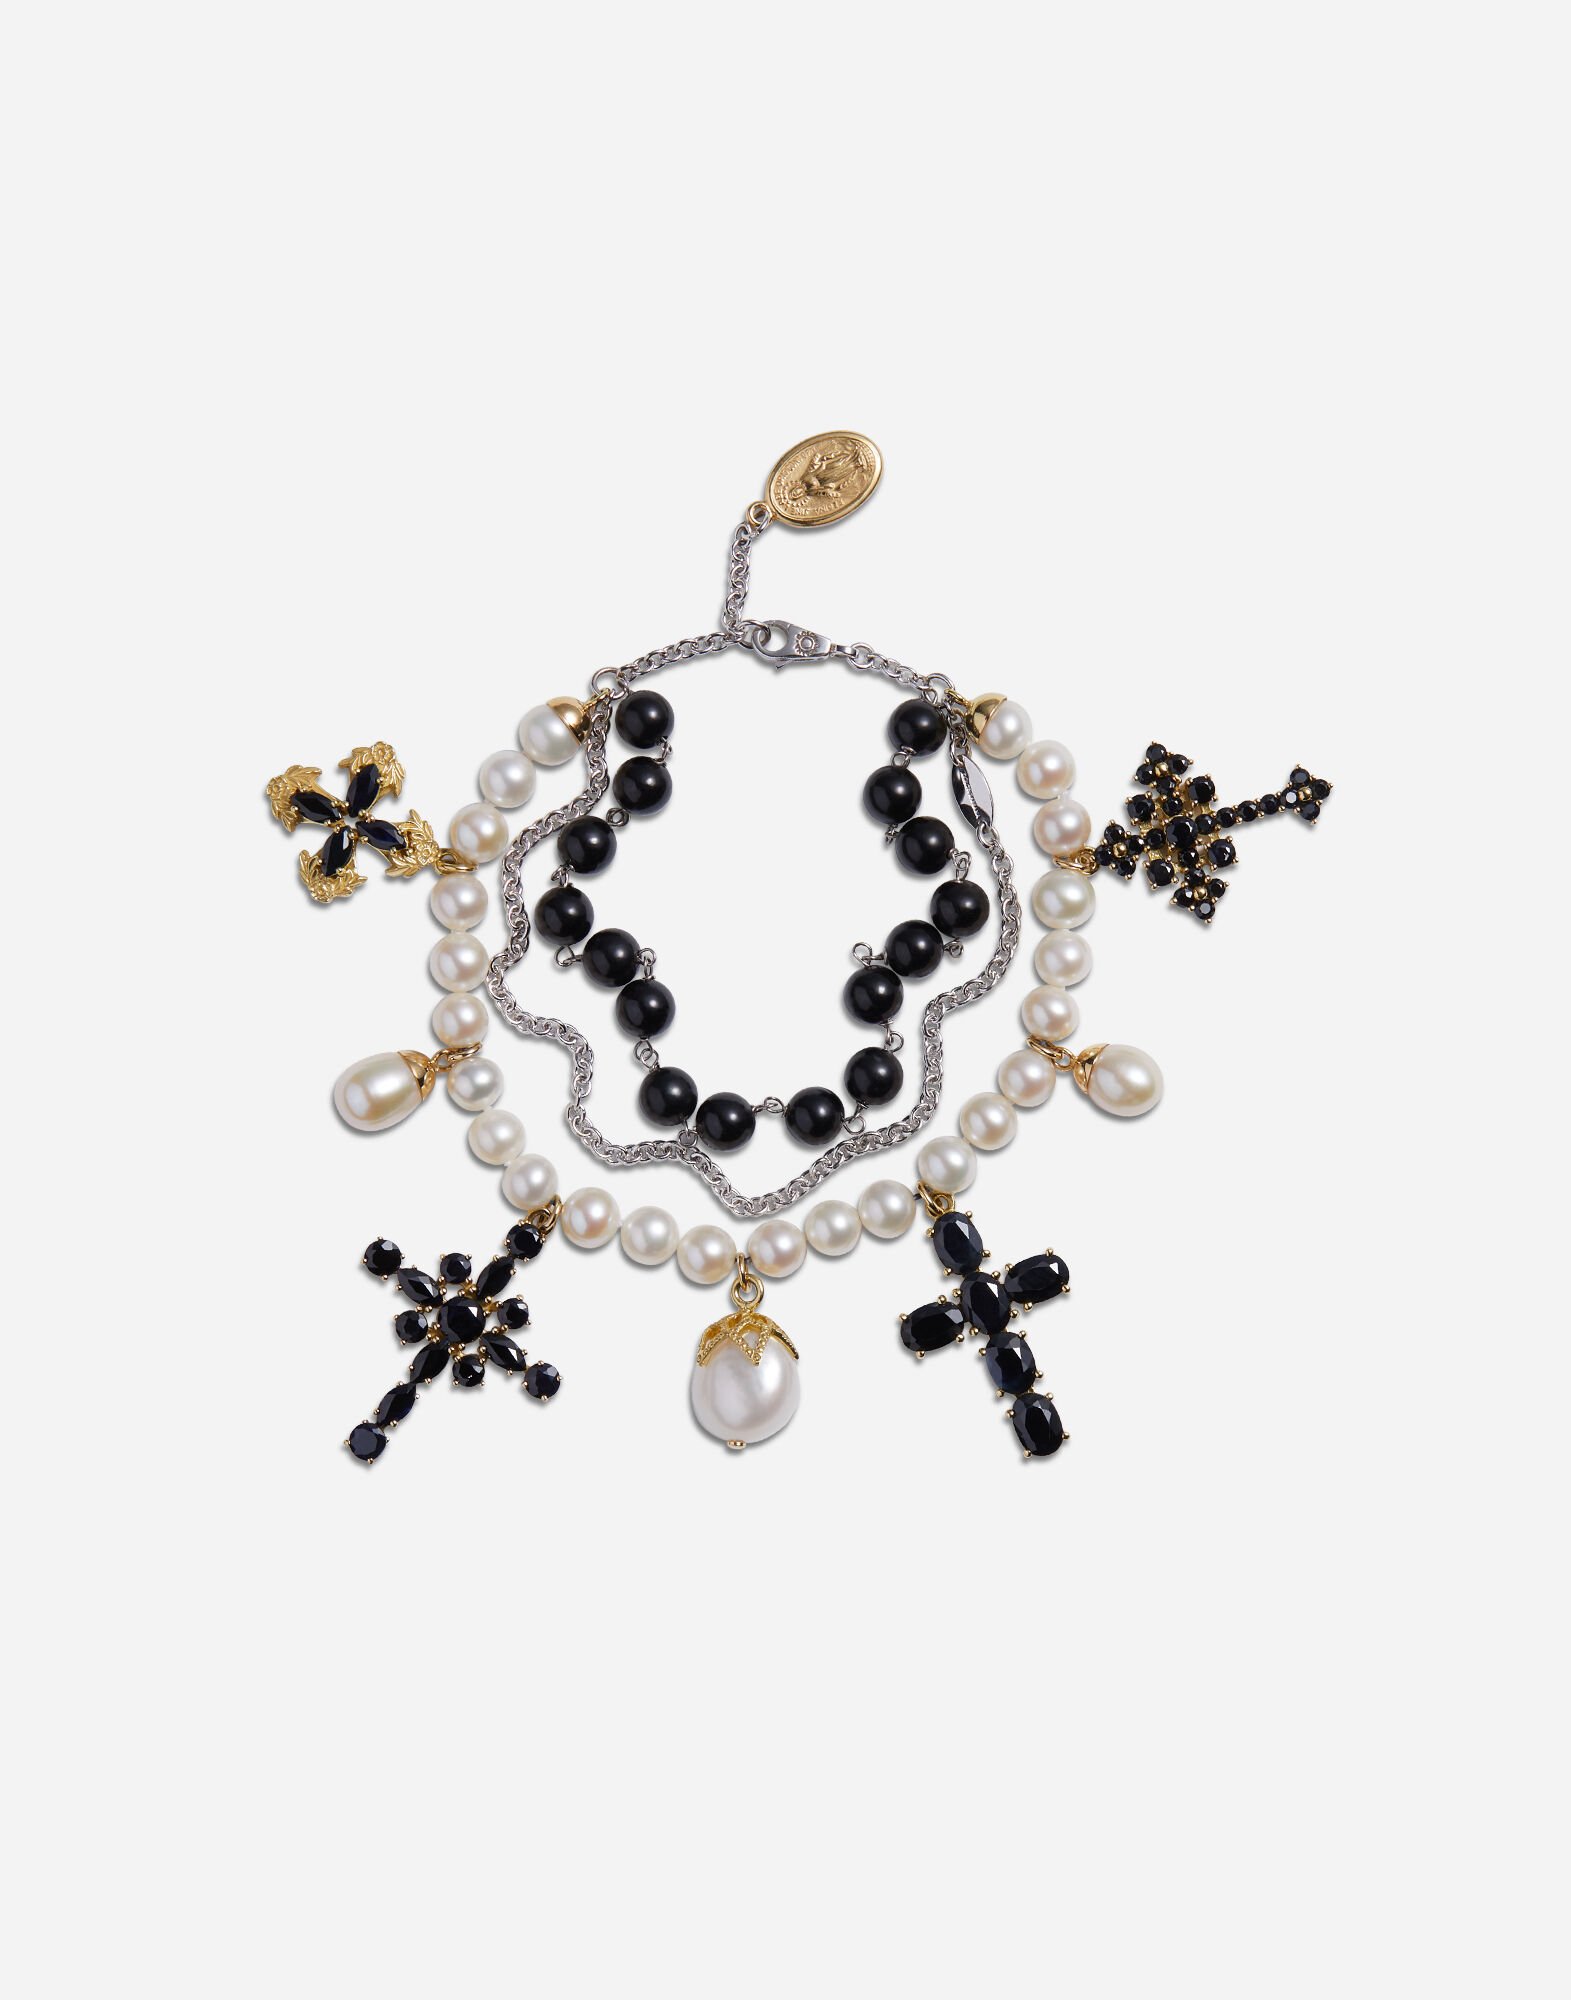 ${brand} Yellow and white gold family bracelet with cblack sapphire, pearl and black jade beads ${colorDescription} ${masterID}